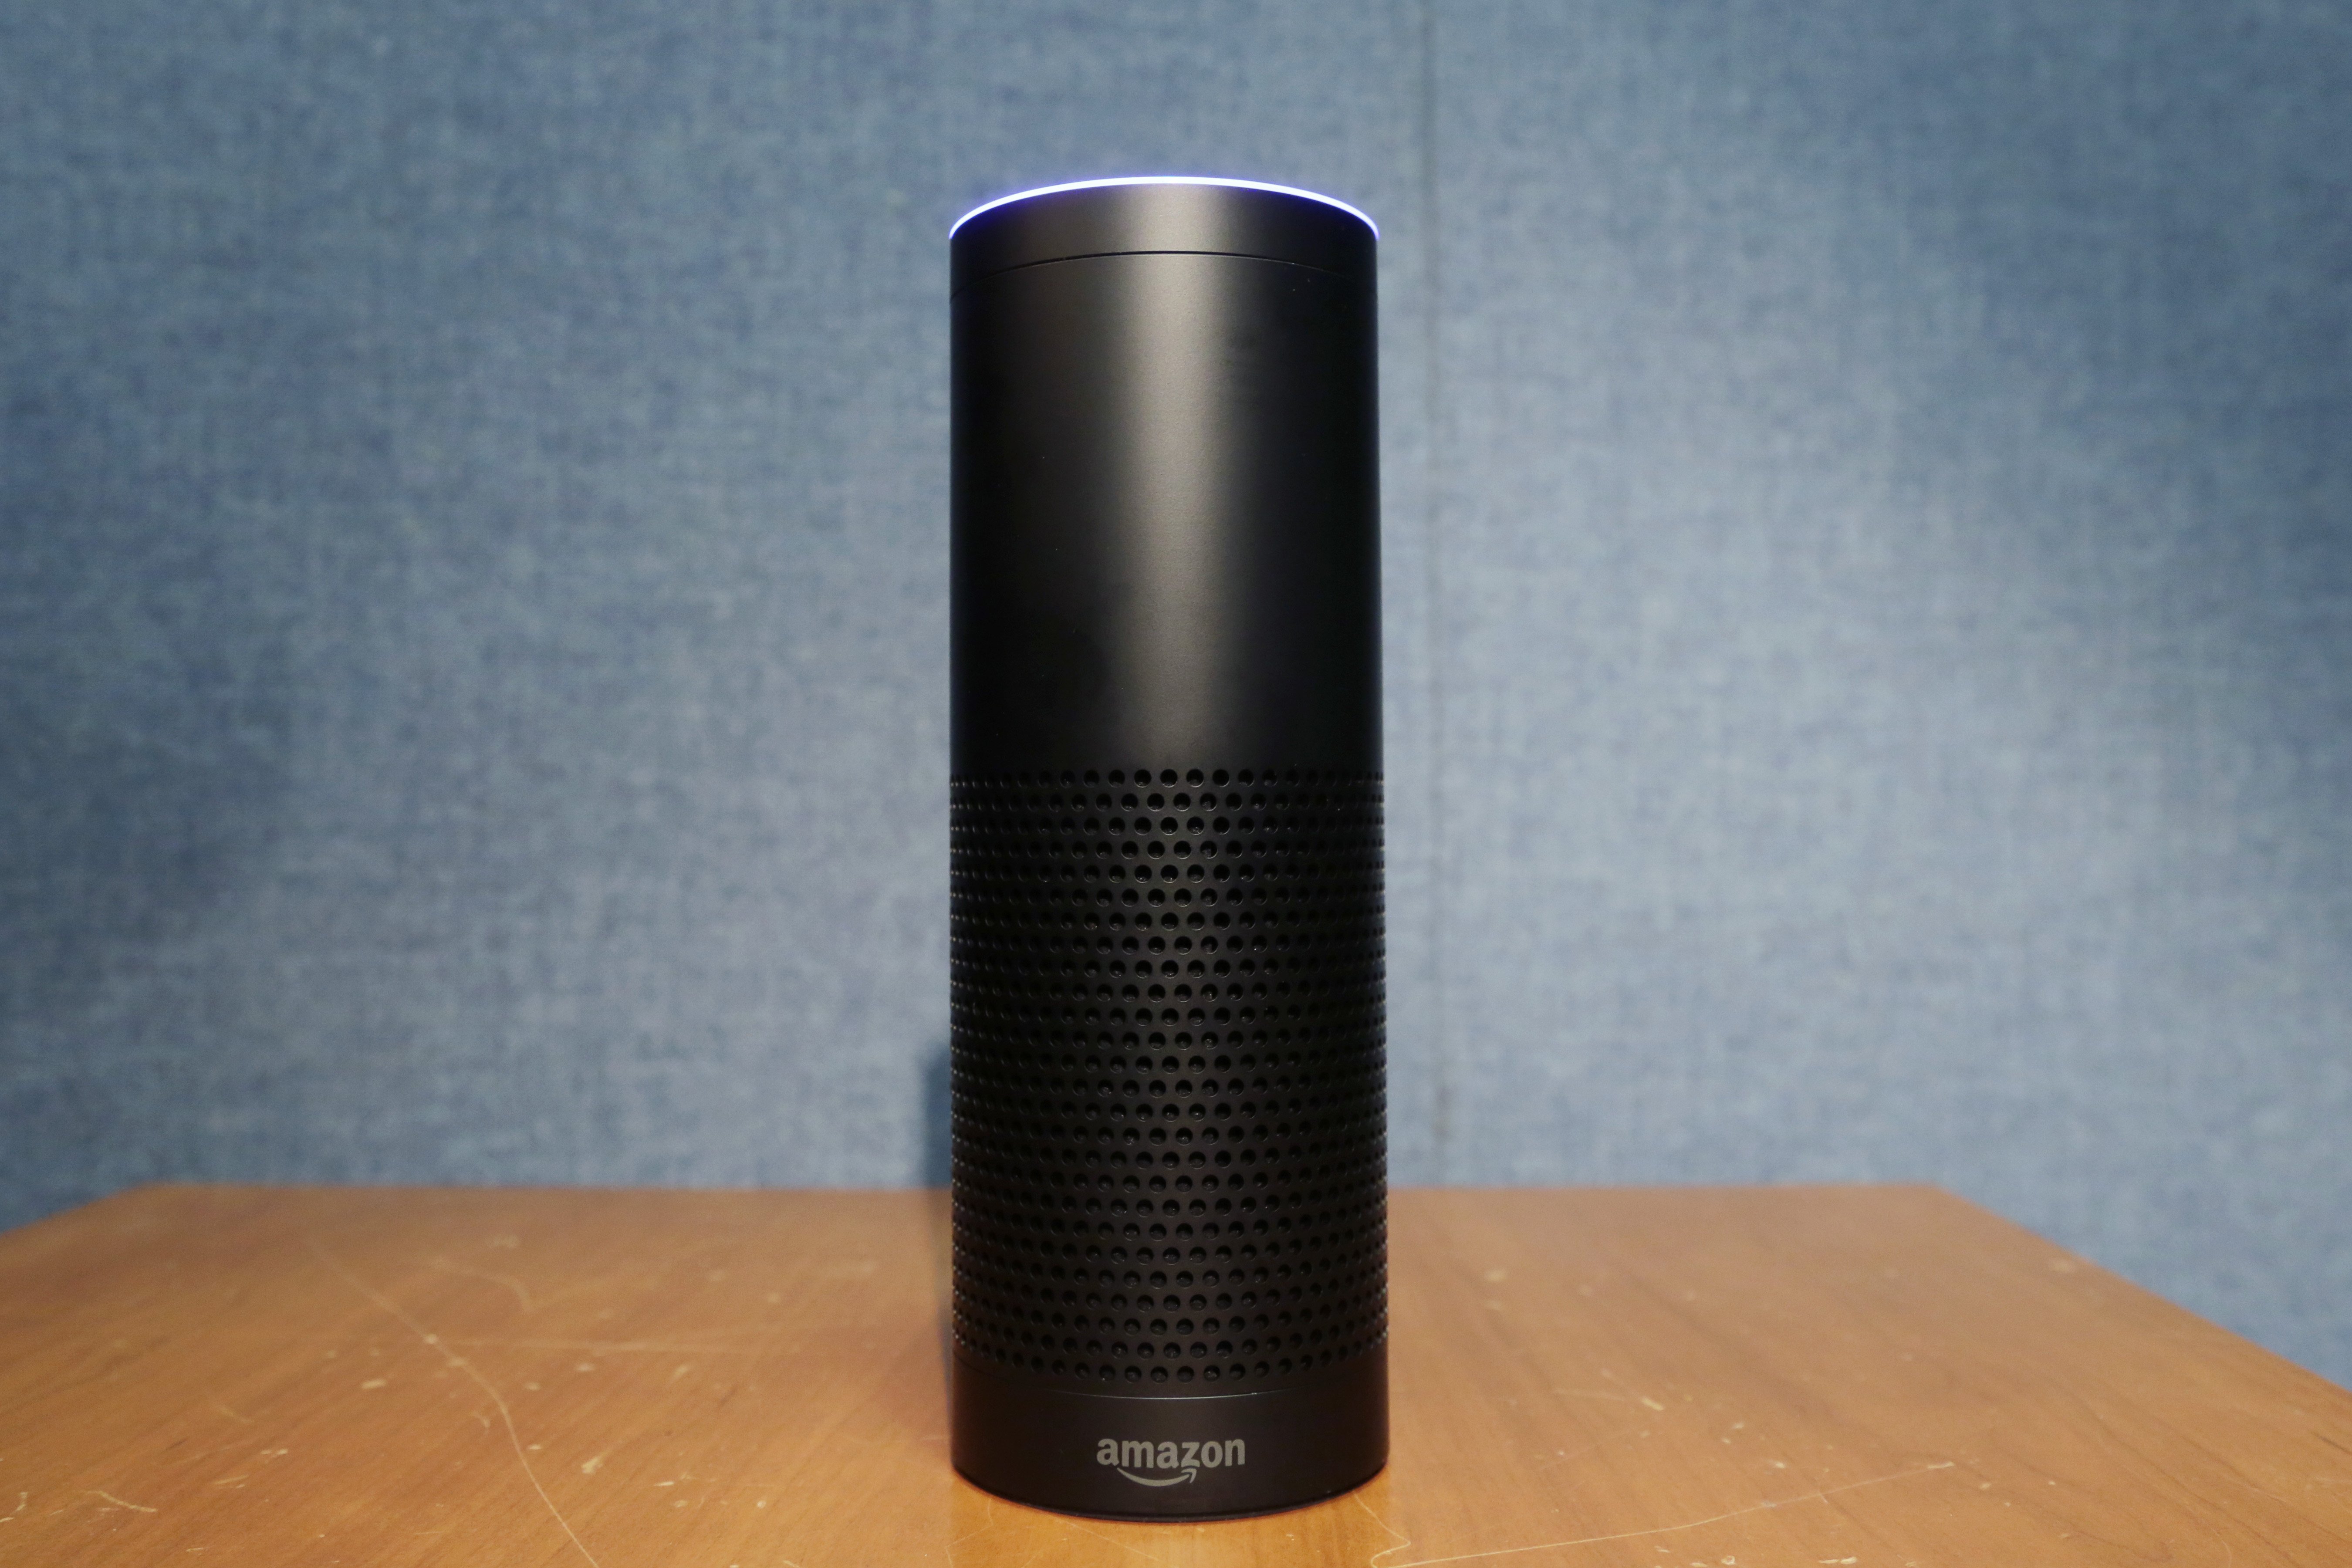 I've owned an Amazon Echo for less than a day and I'm blown away